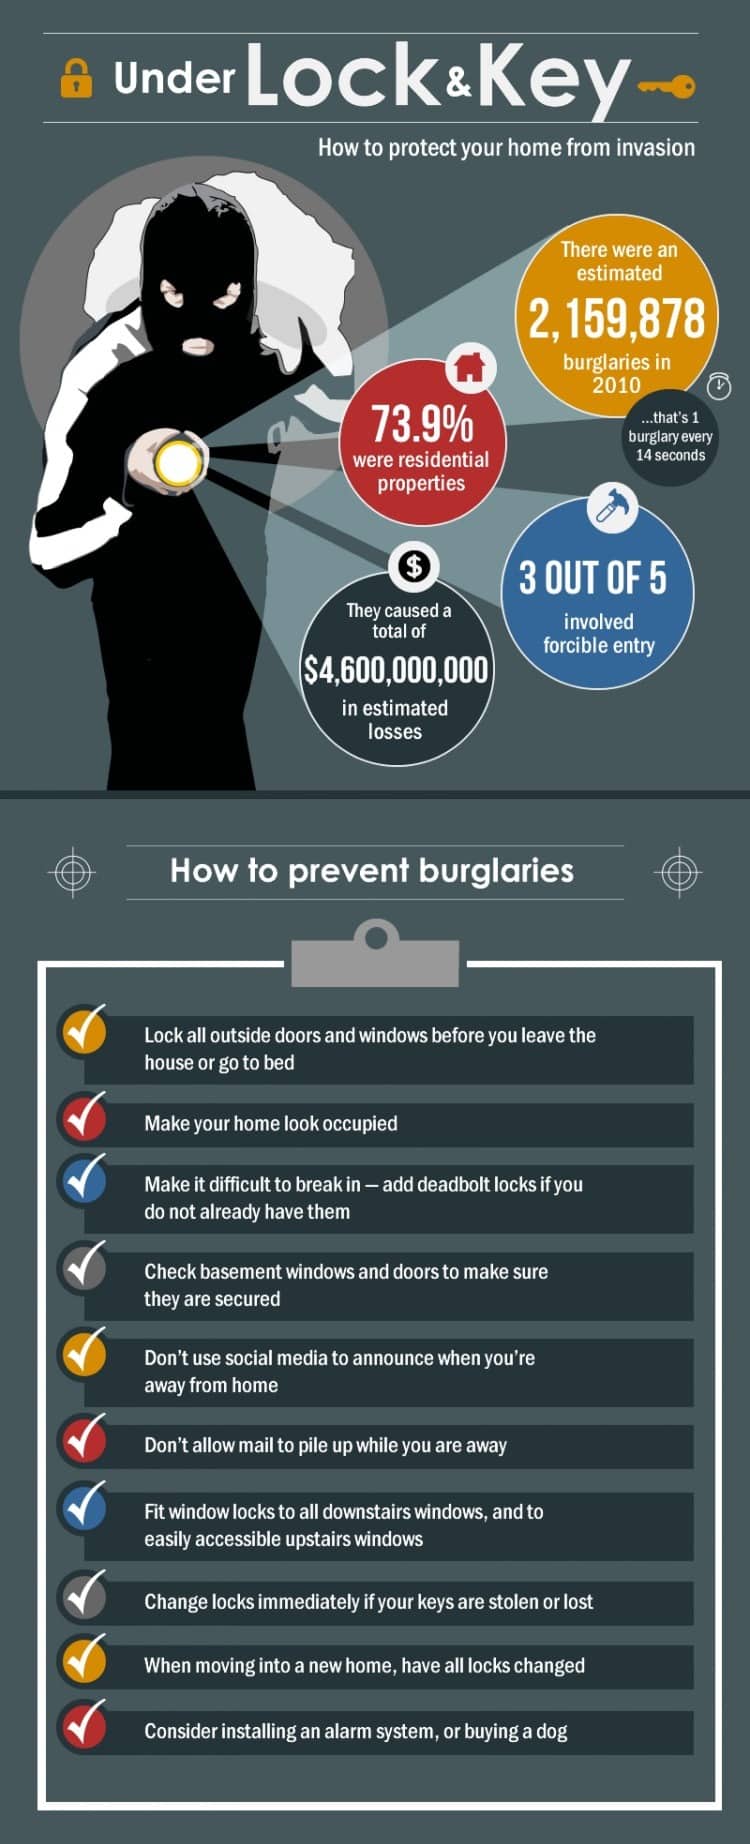 how to protect your home from invasion under lock and key infographic Middle Class Dad